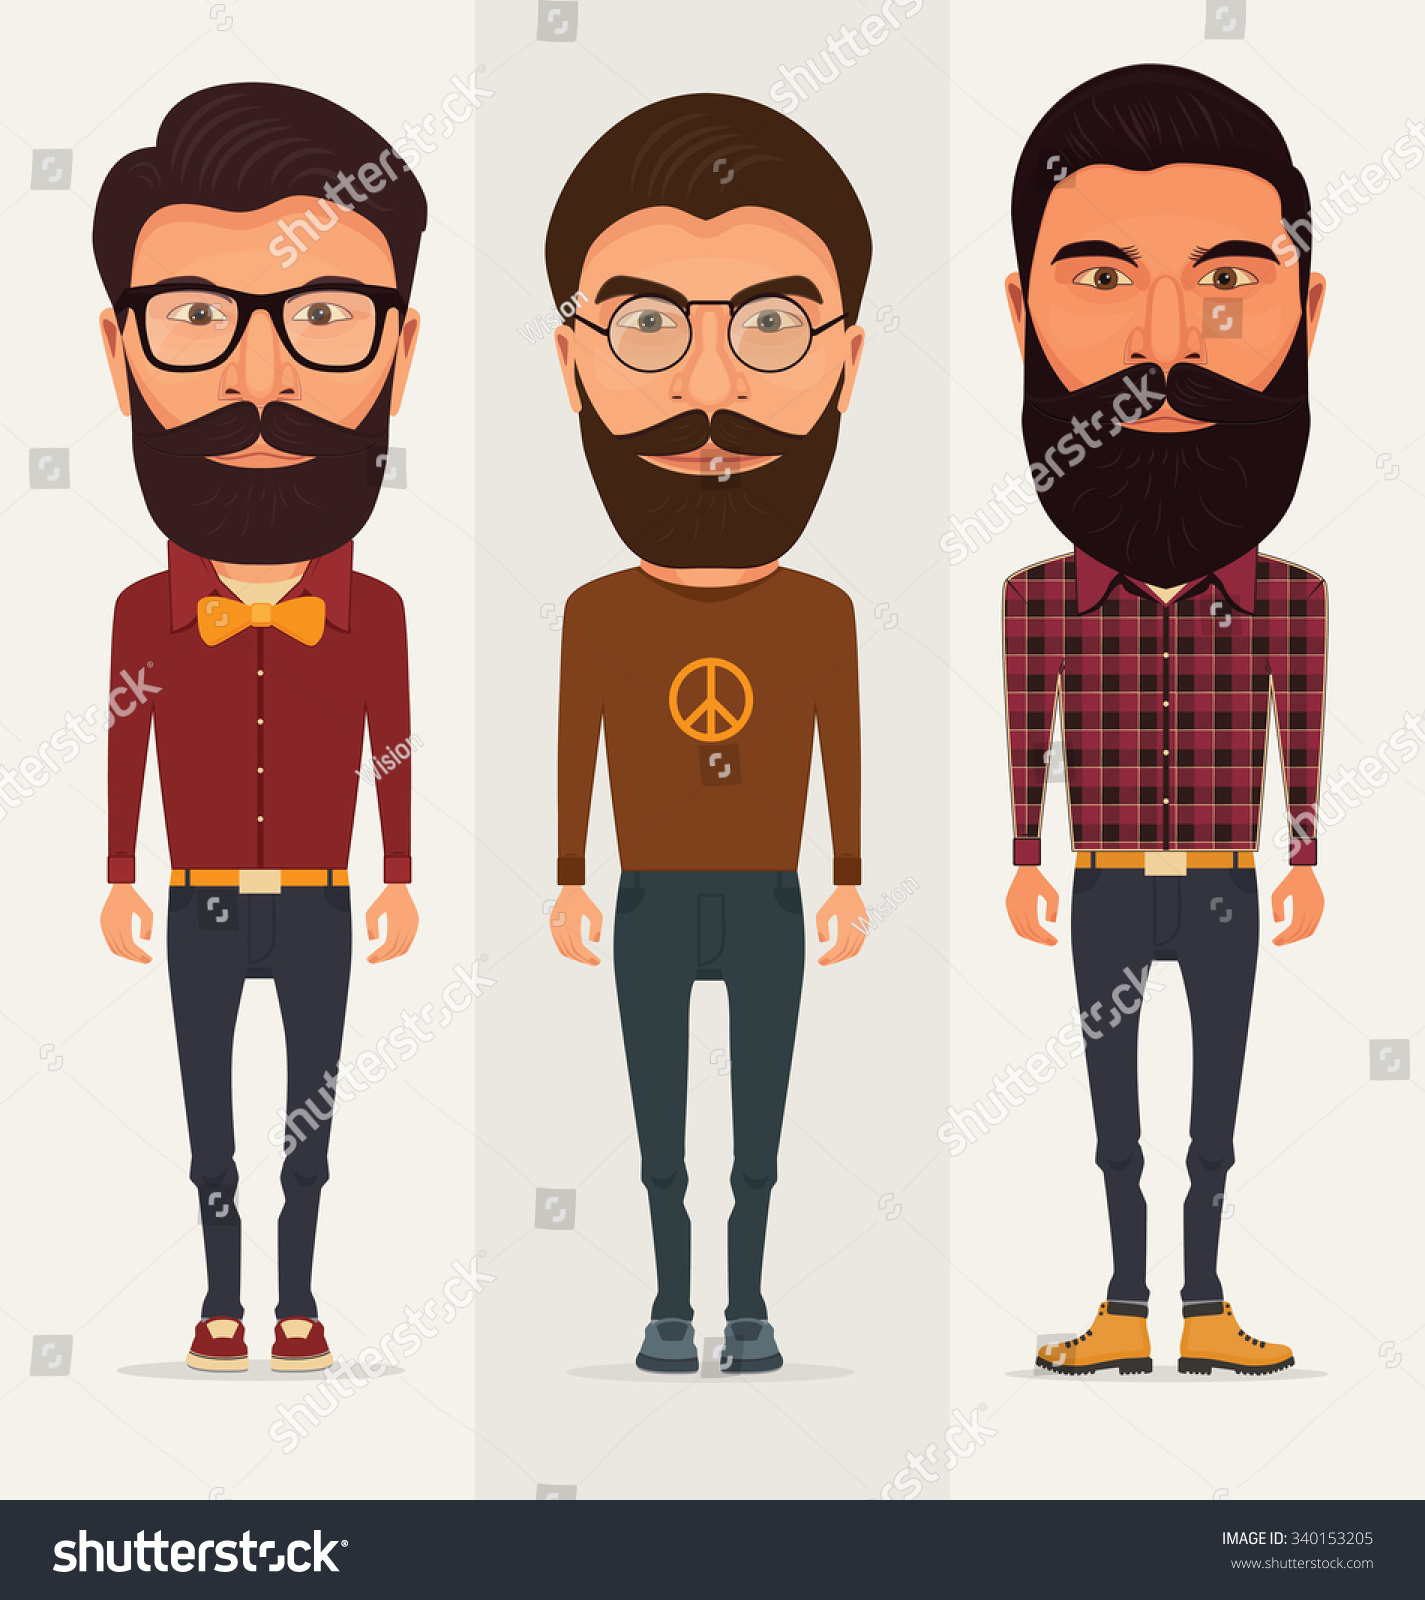 Collection Of Three Characters With Beard - Hipster, Lumberjack, Hippie ...